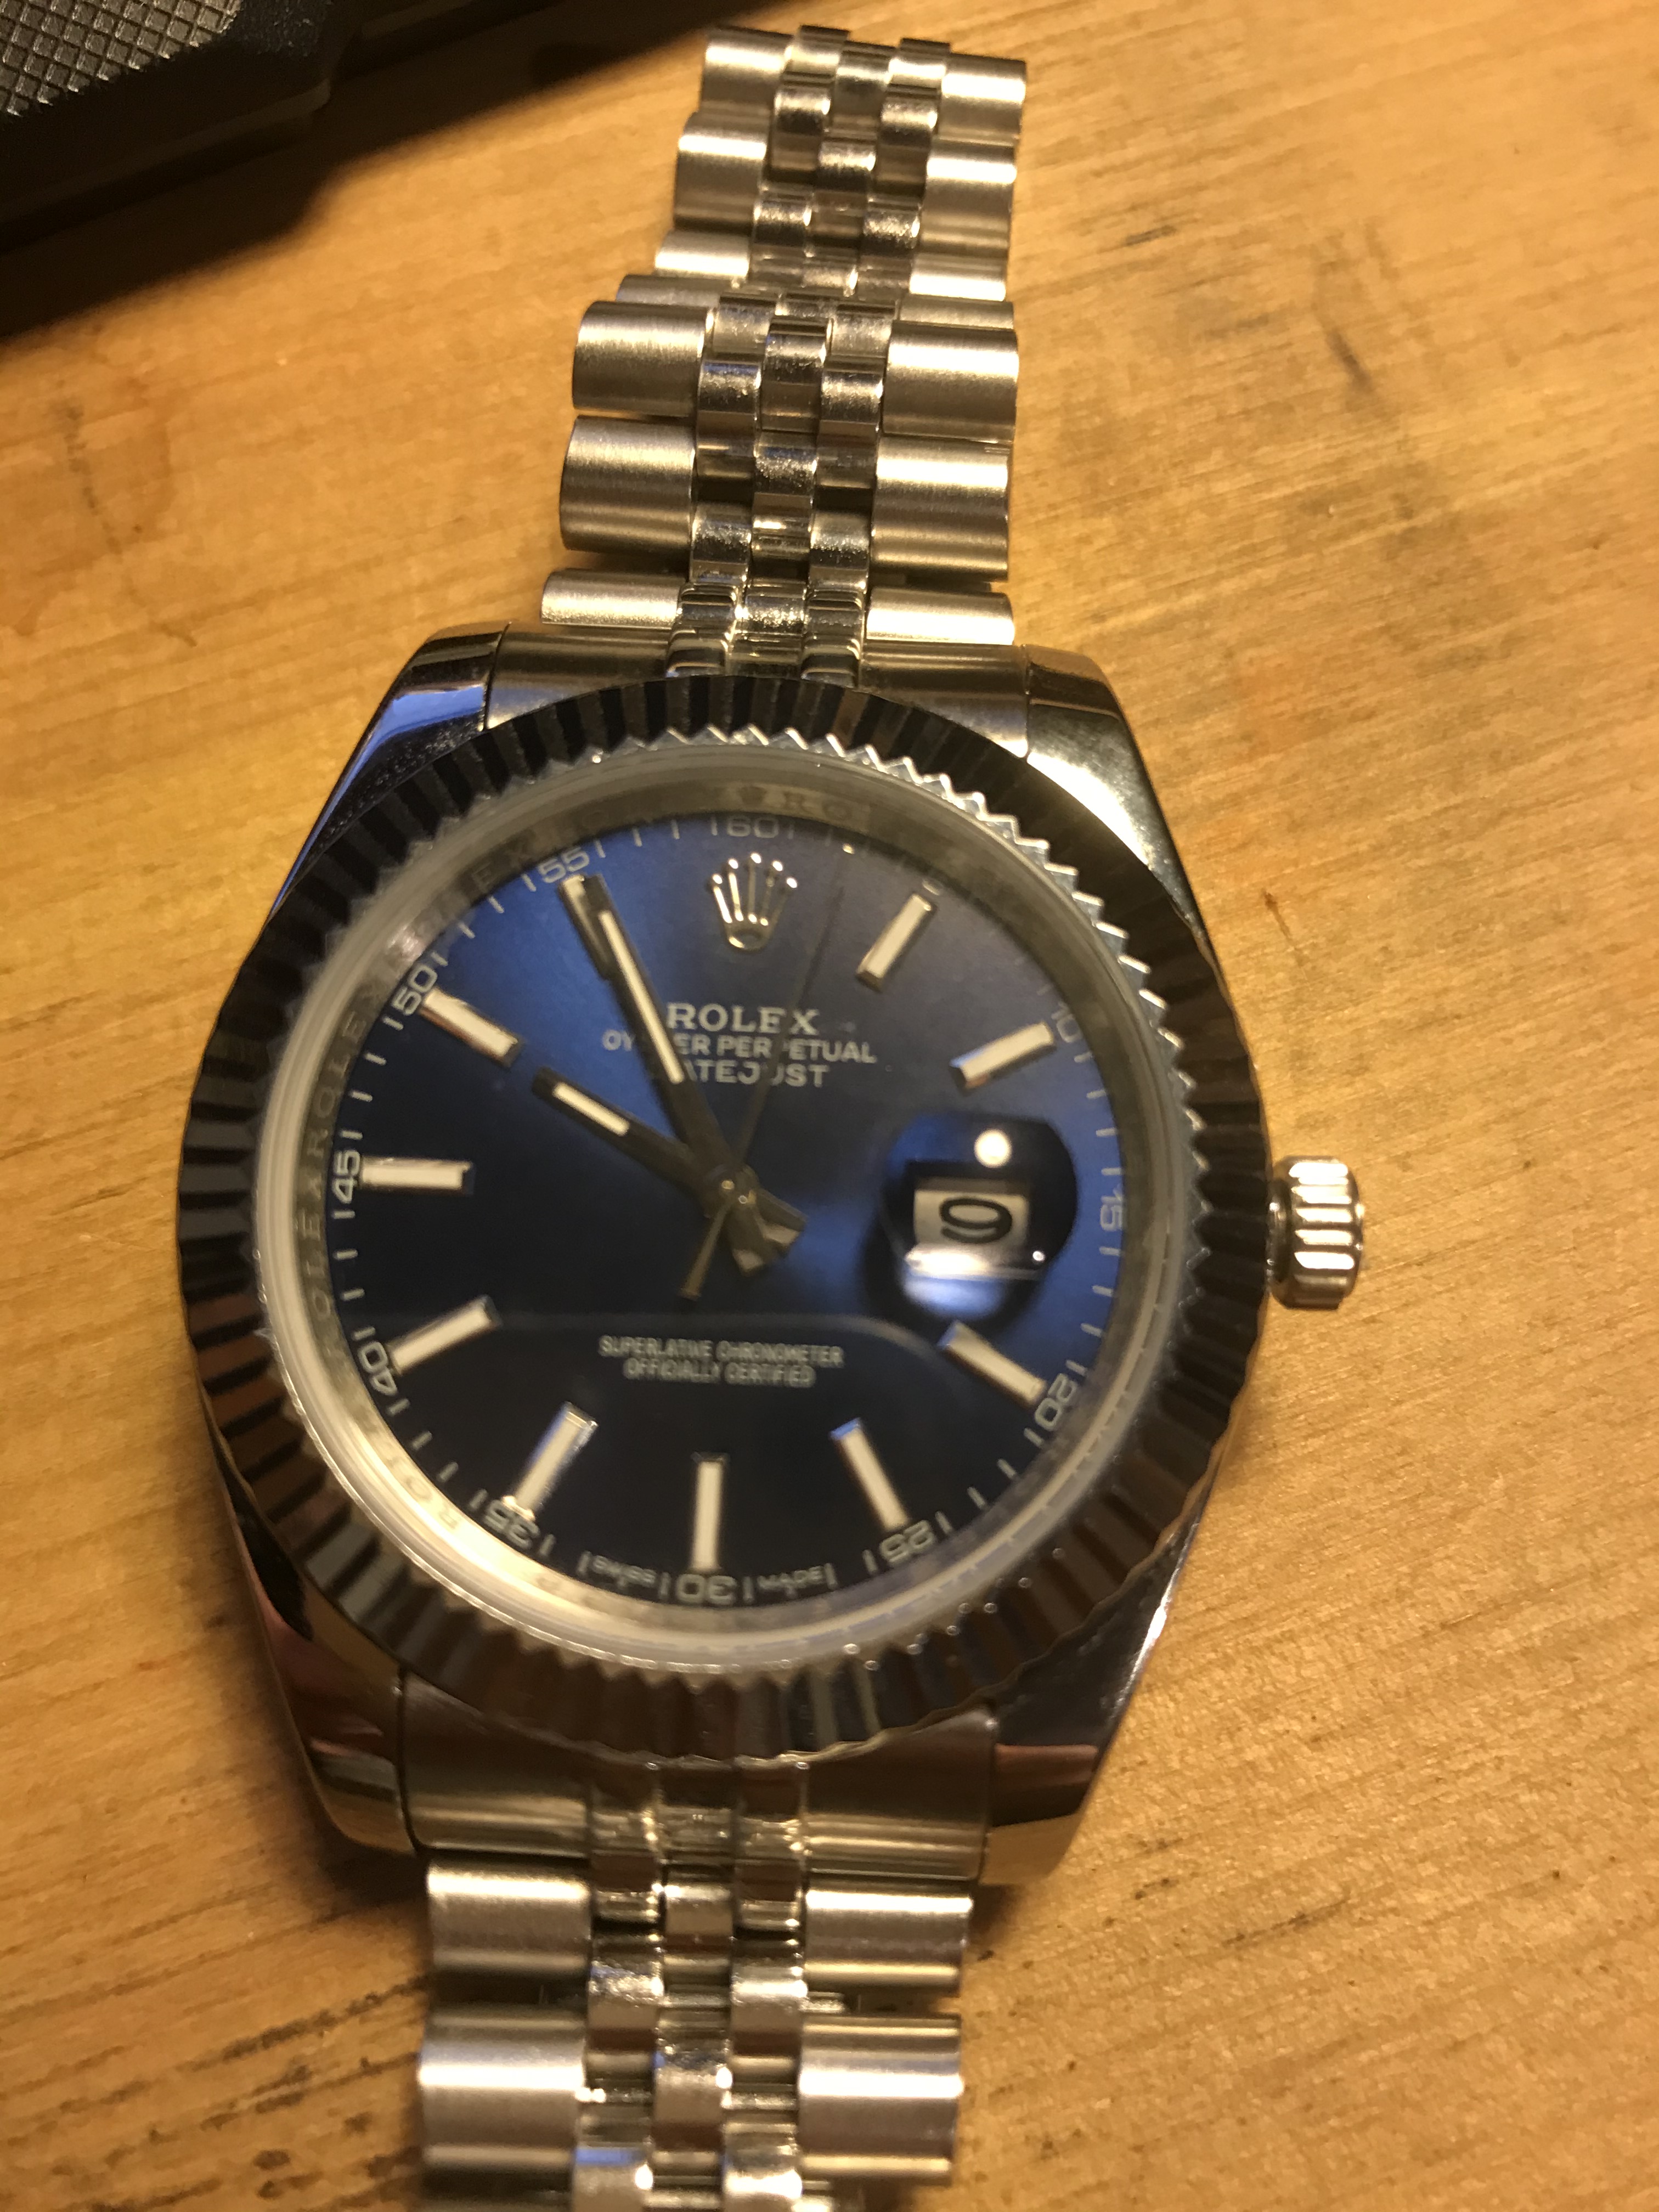 dhgate rolex review